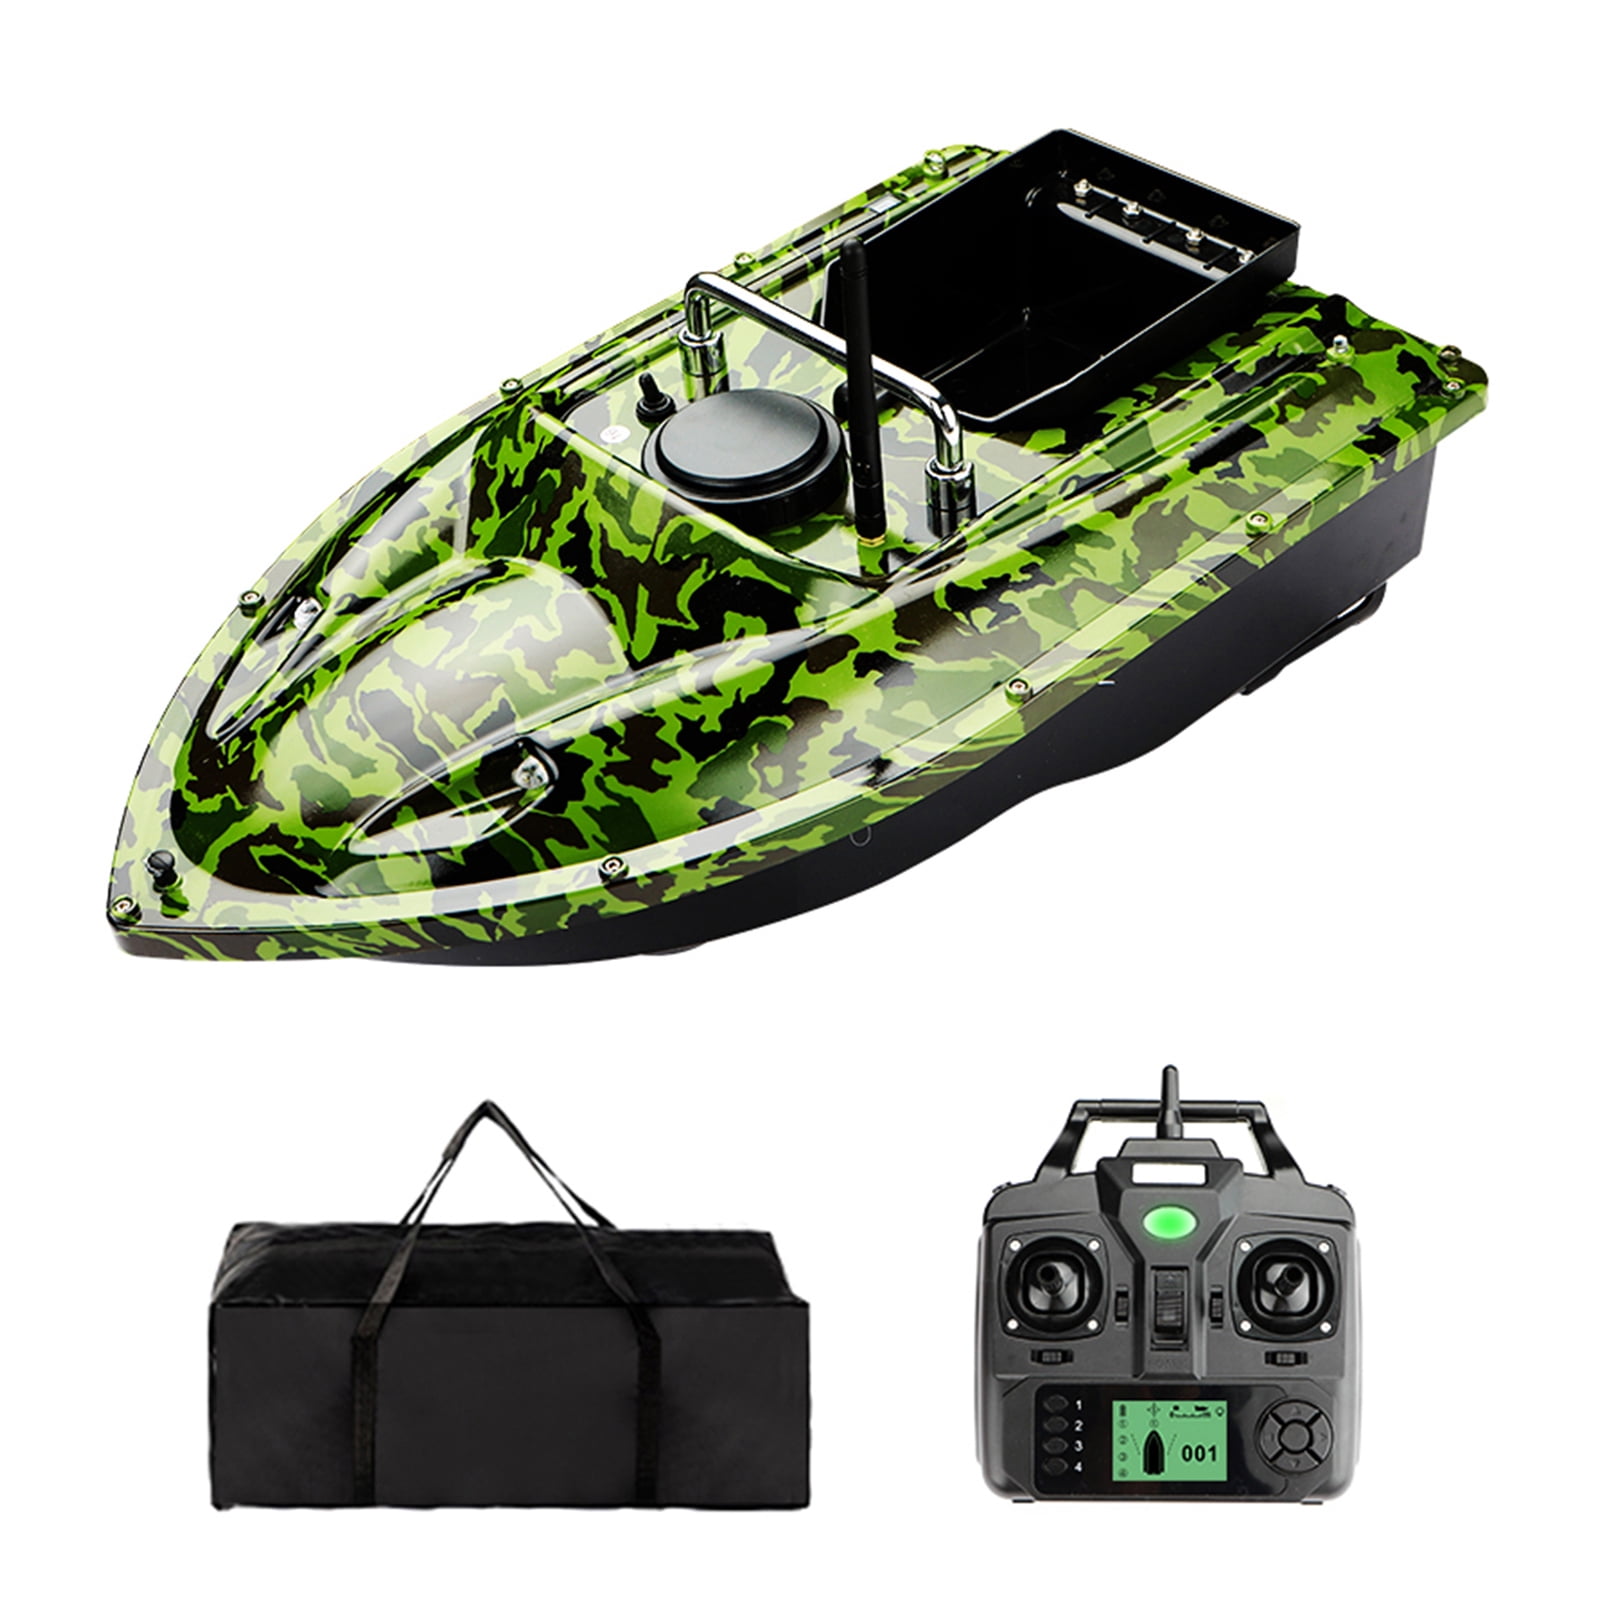 Vistreck Remote Control Bait Boat for Fishing Boat 500 Meters Double Motor with Night 5200mAh Battery Storage Bag Package, Size: with GPS-1PCS 5200mAh